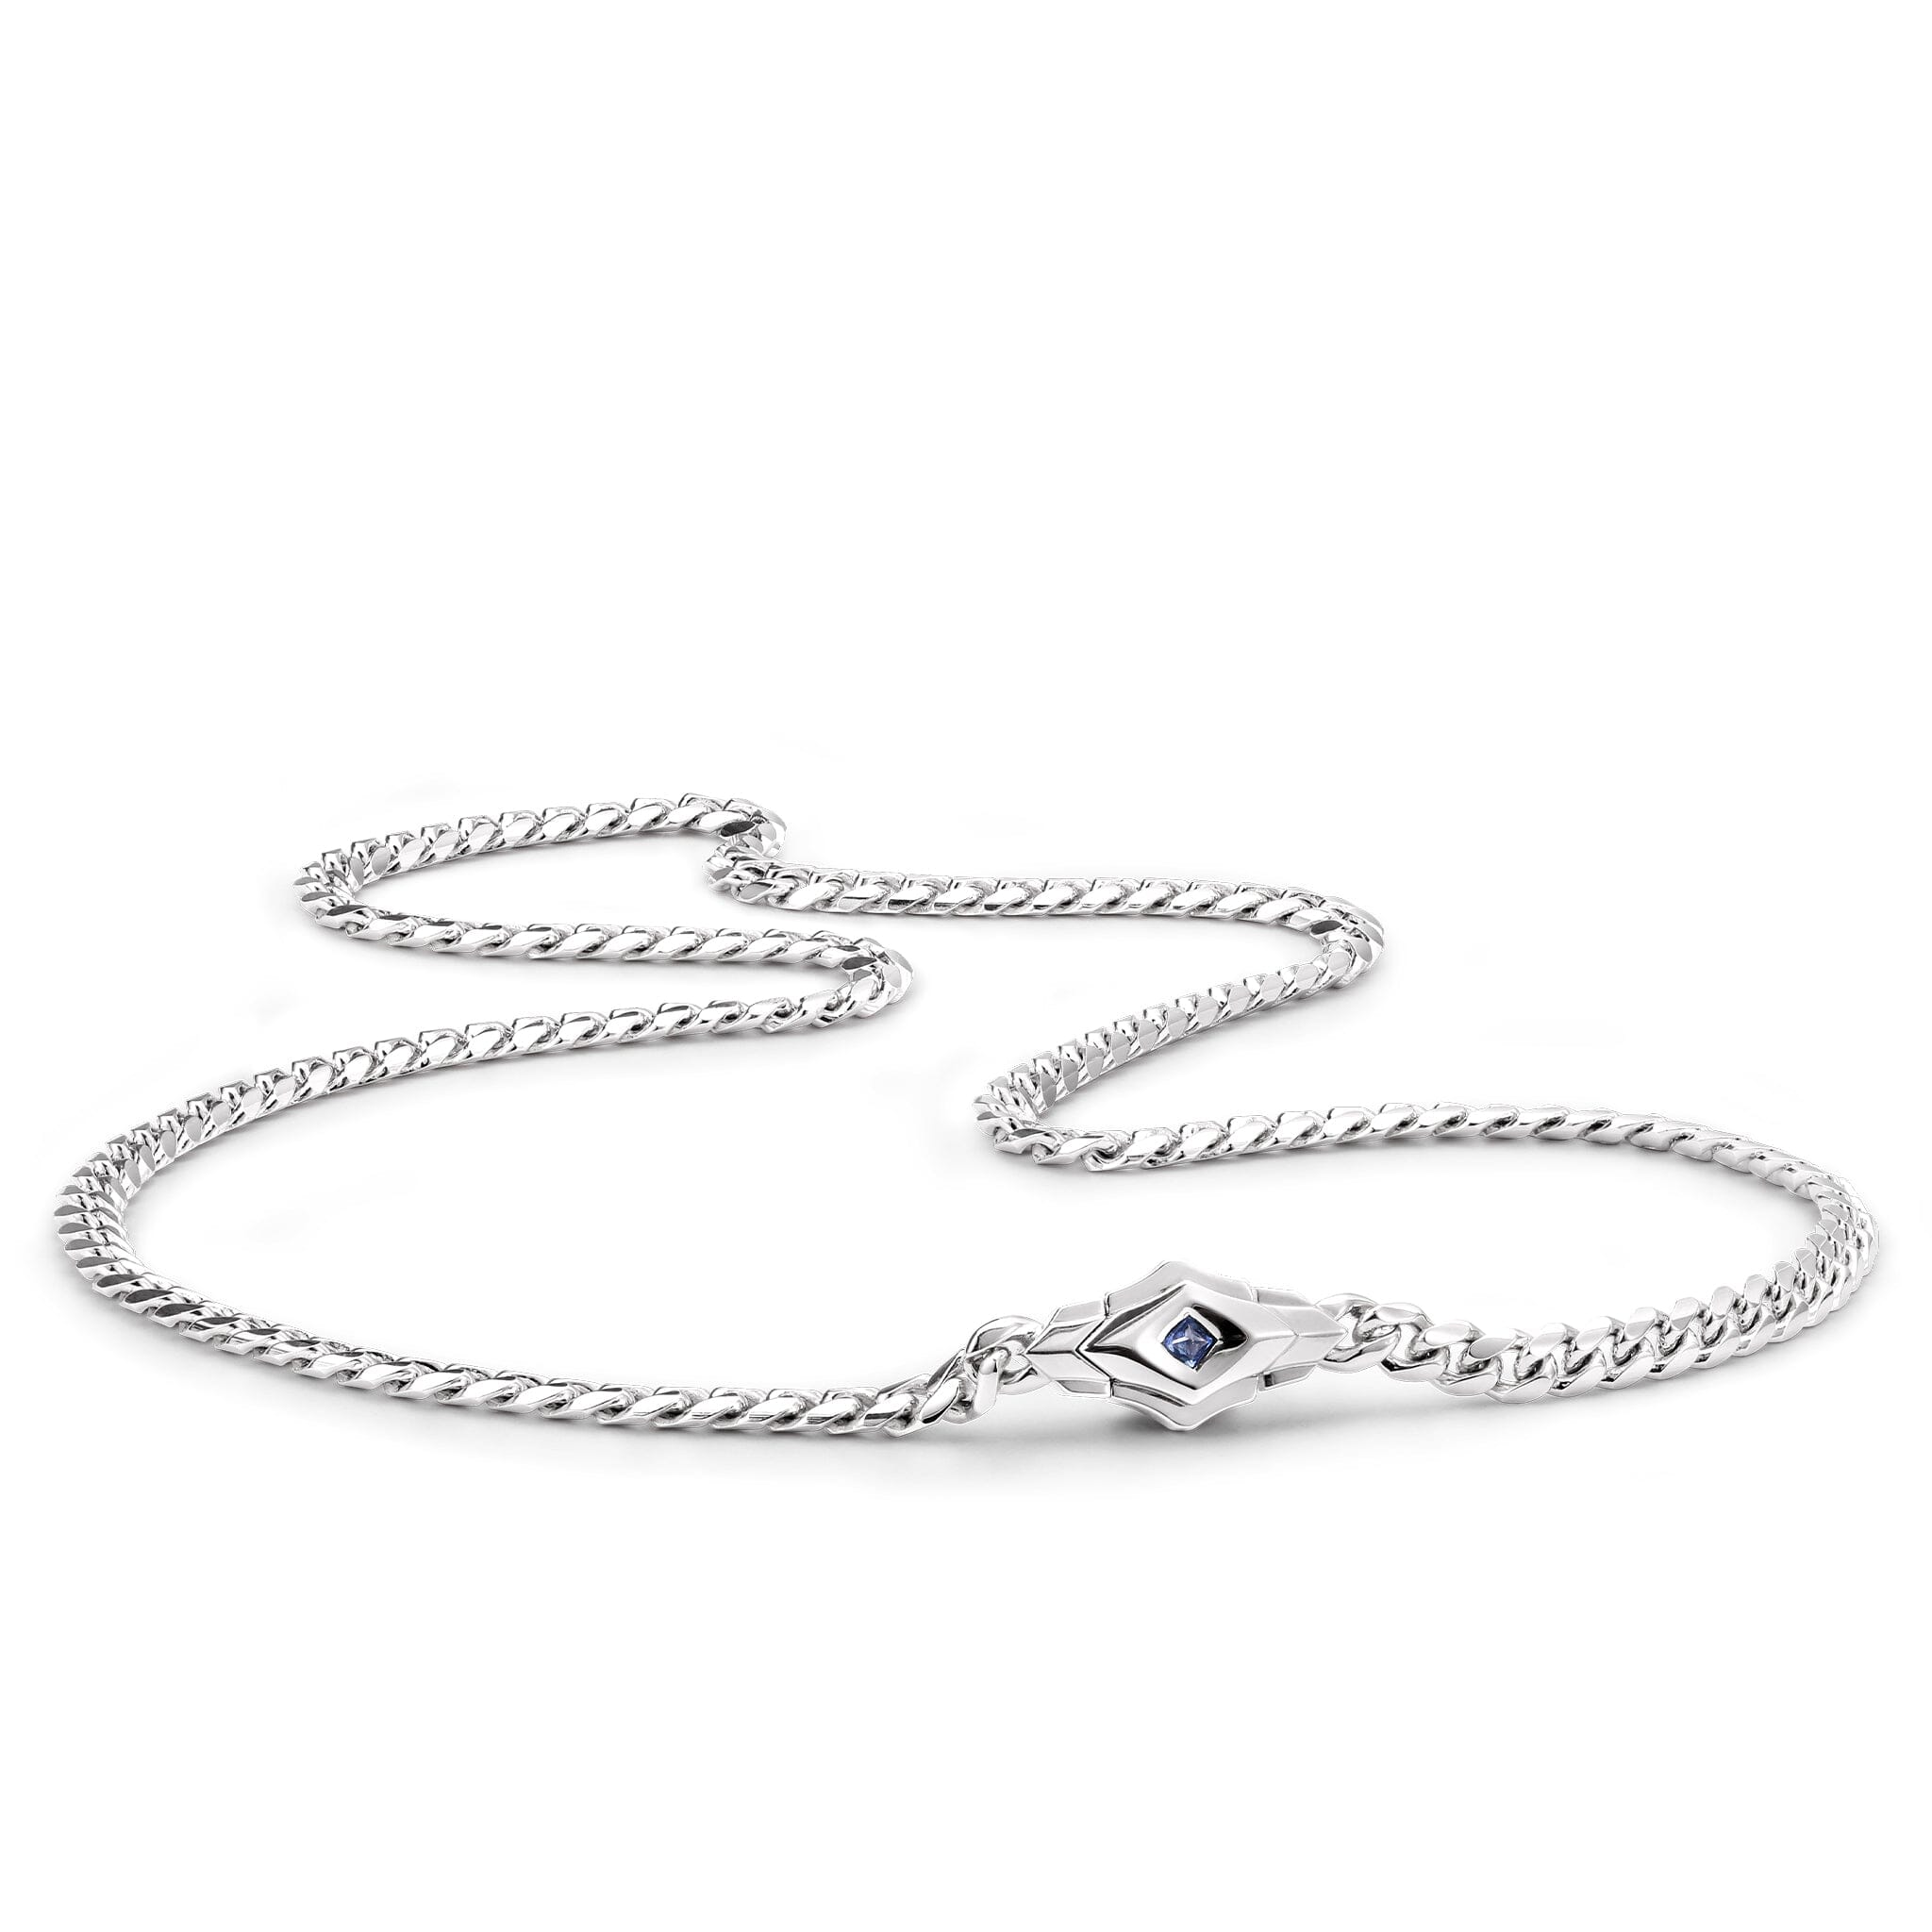 Men's Ceylon Silver Chain Necklace with Sapphire Clasp Chains WAA FASHION GROUP 55cm 